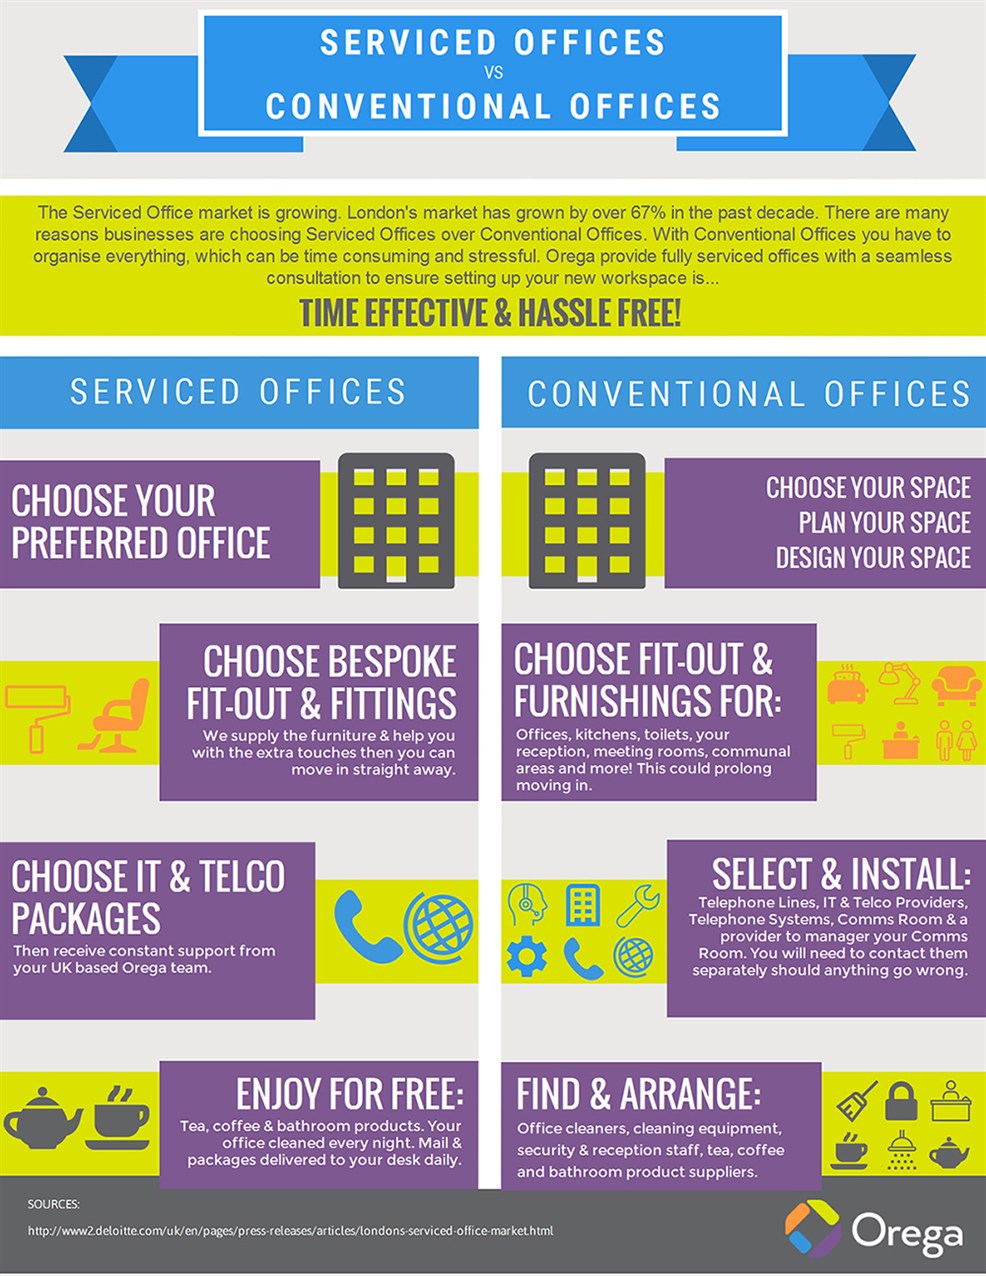 Service offices vs conventional offices infographic